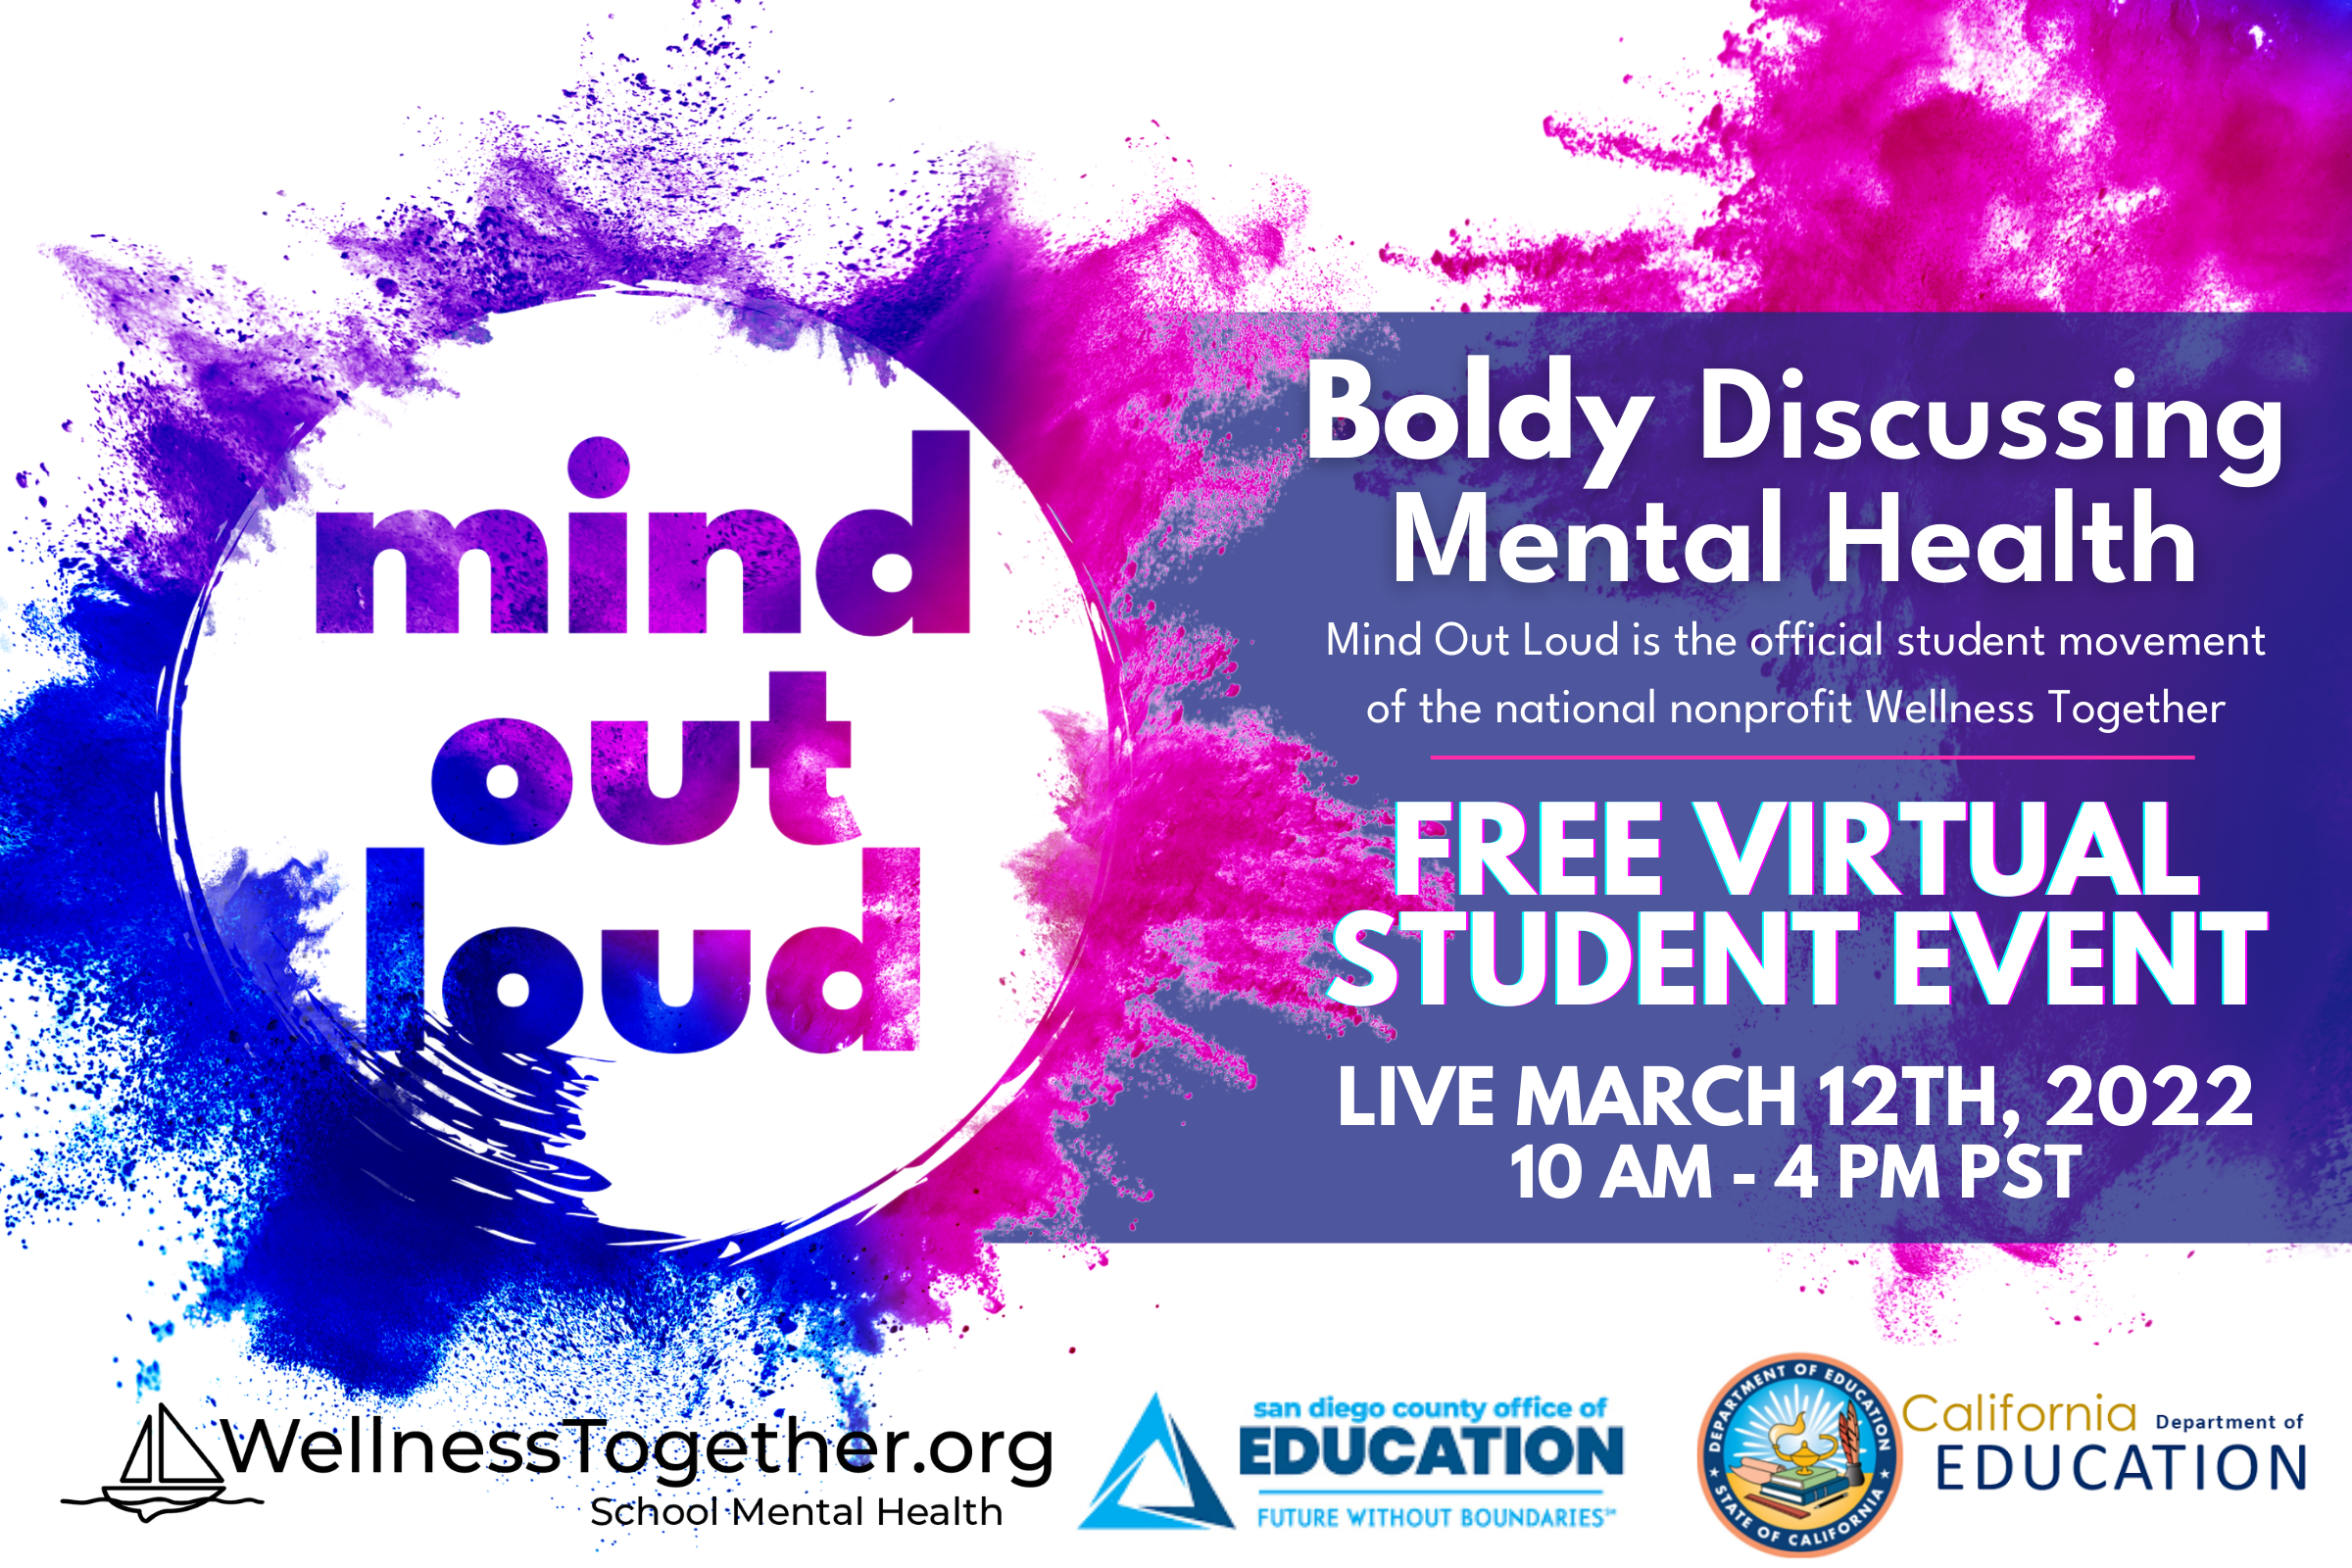 Boldy Discussing Mental Health Virtual event